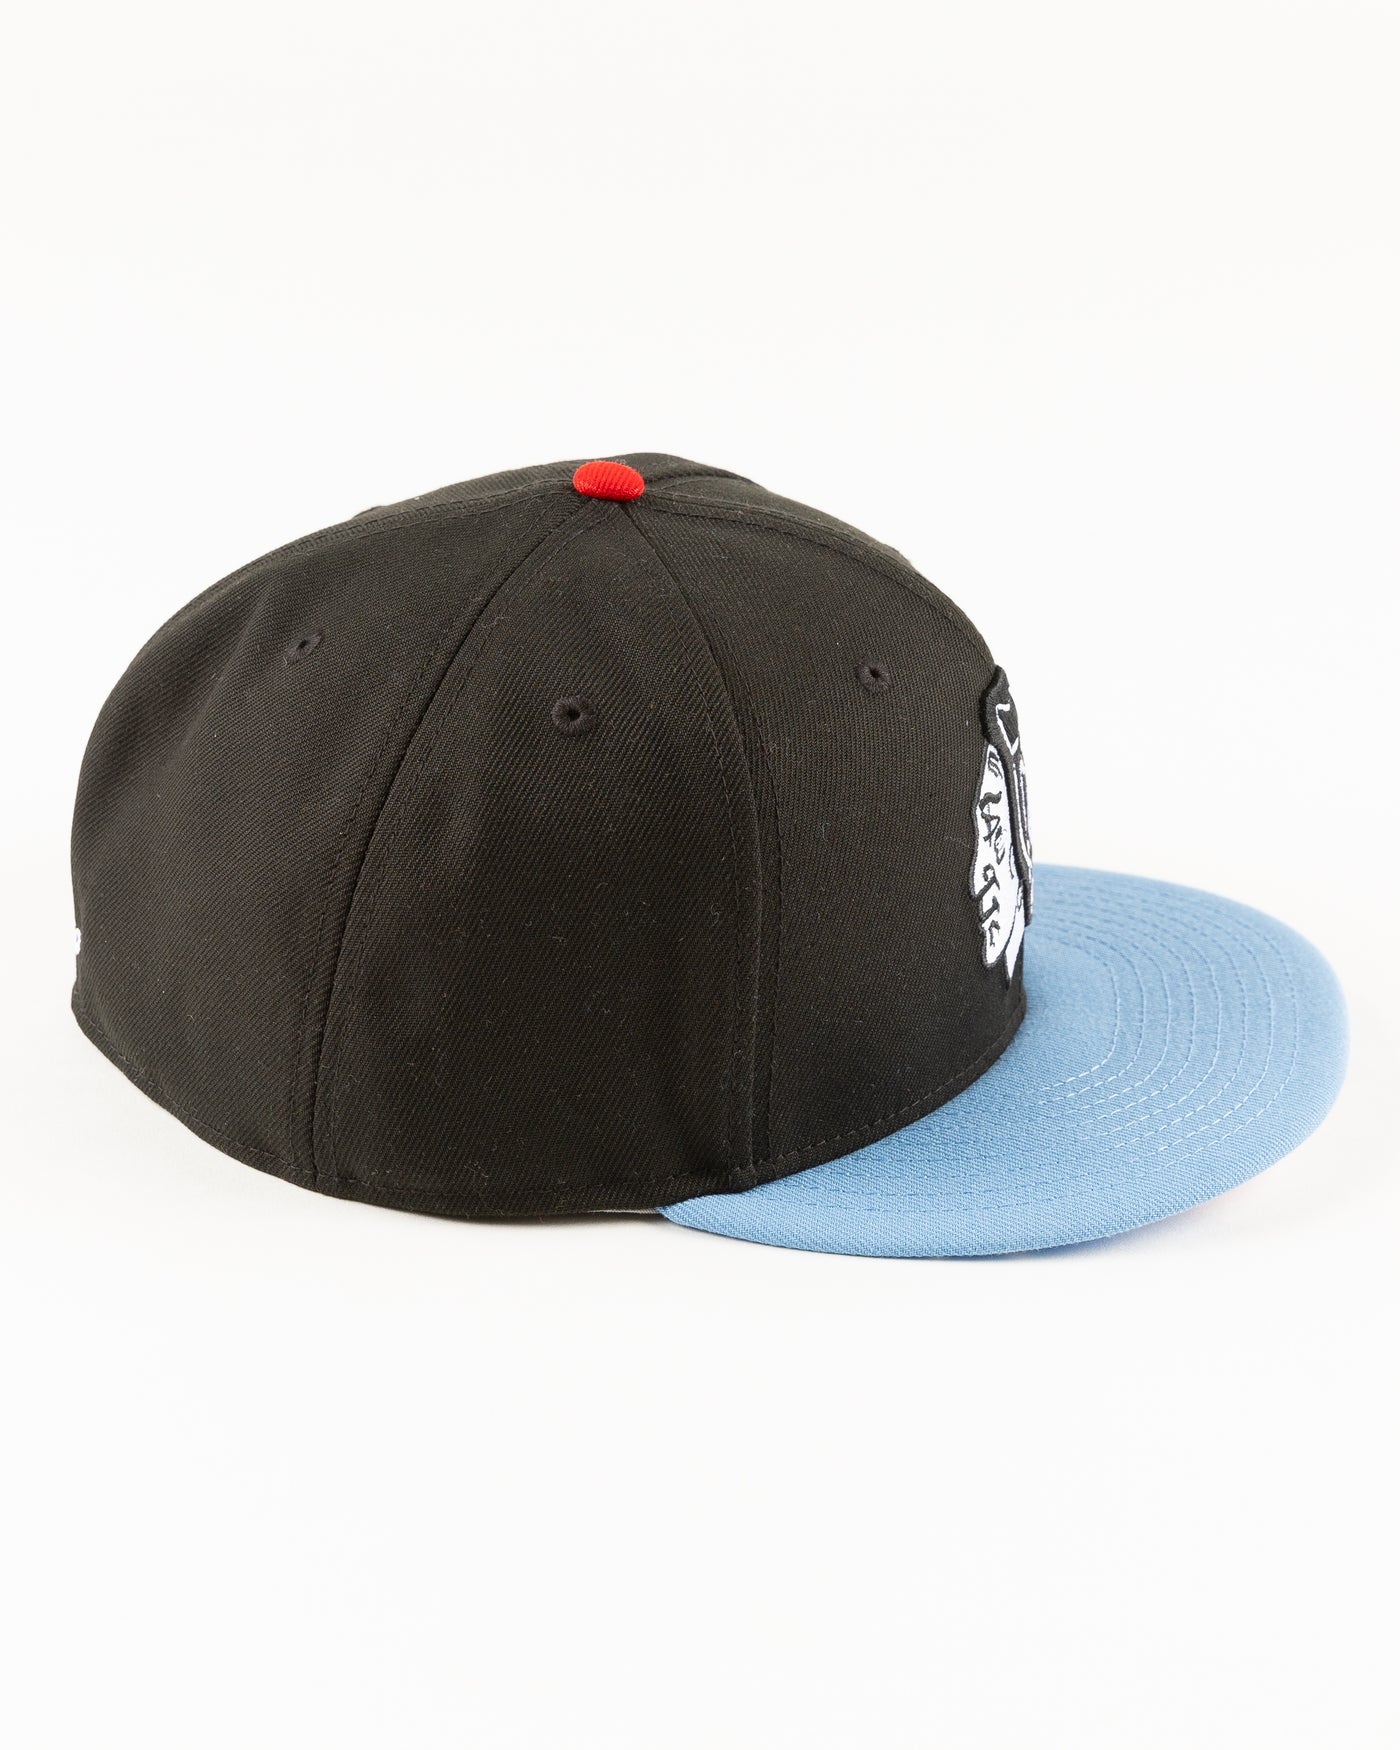 black and blue New Era fitted cap with tonal Chicago Blackhawks primary logo on front - right side lay flat